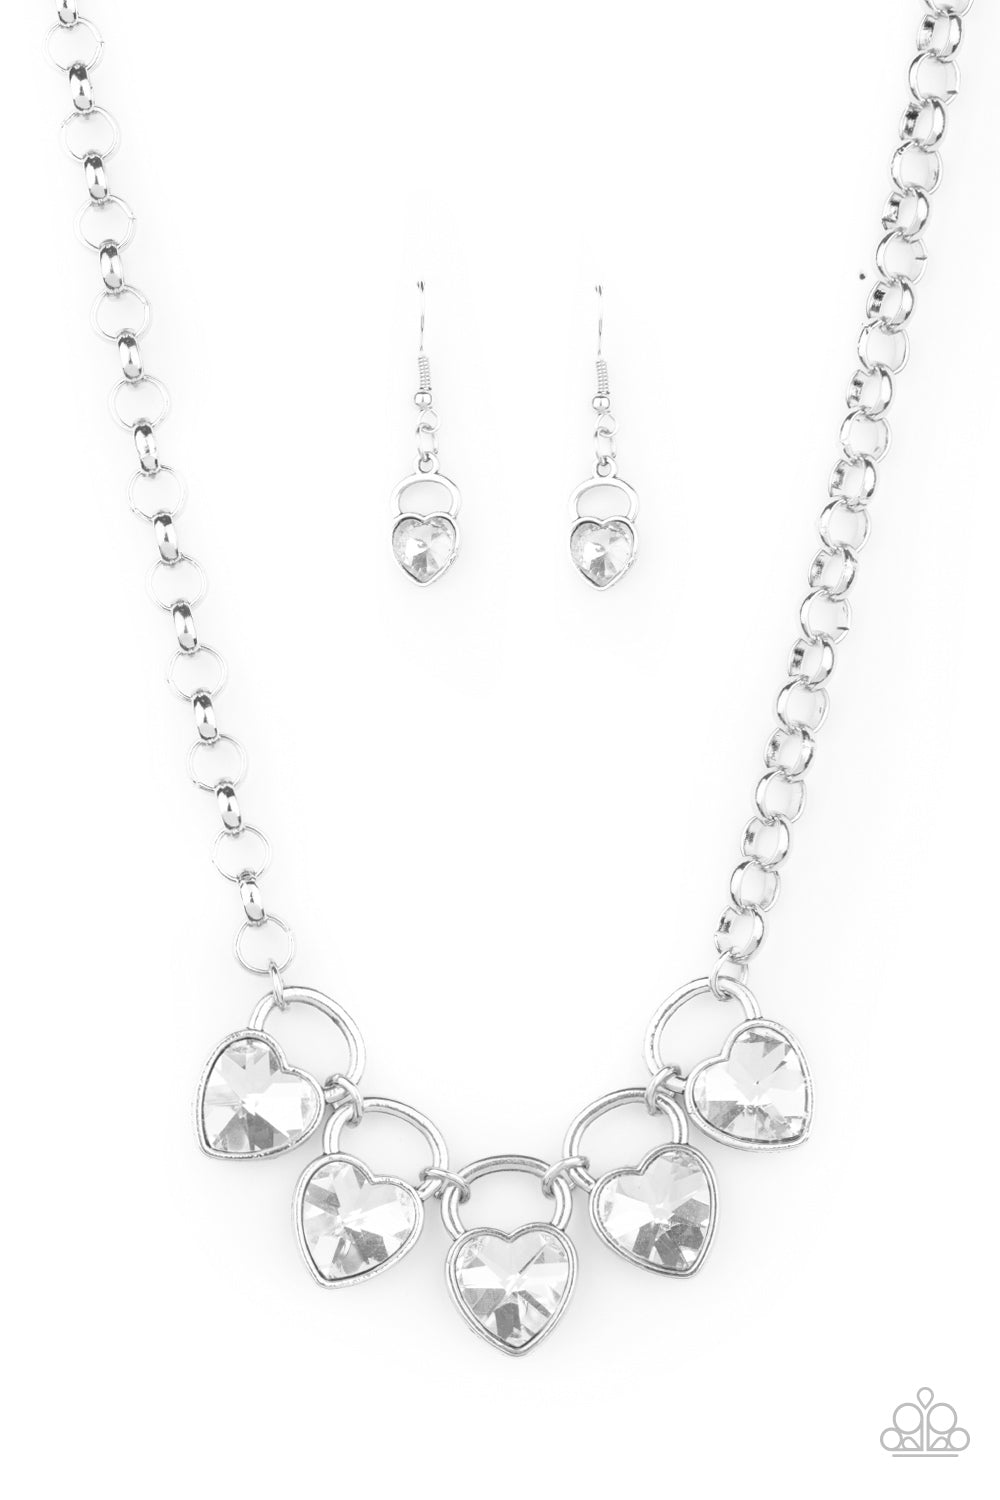 Paparazzi HEART On Your Heels Necklace - January 2021 Life Of The Party Exclusive - A Finishing Touch 